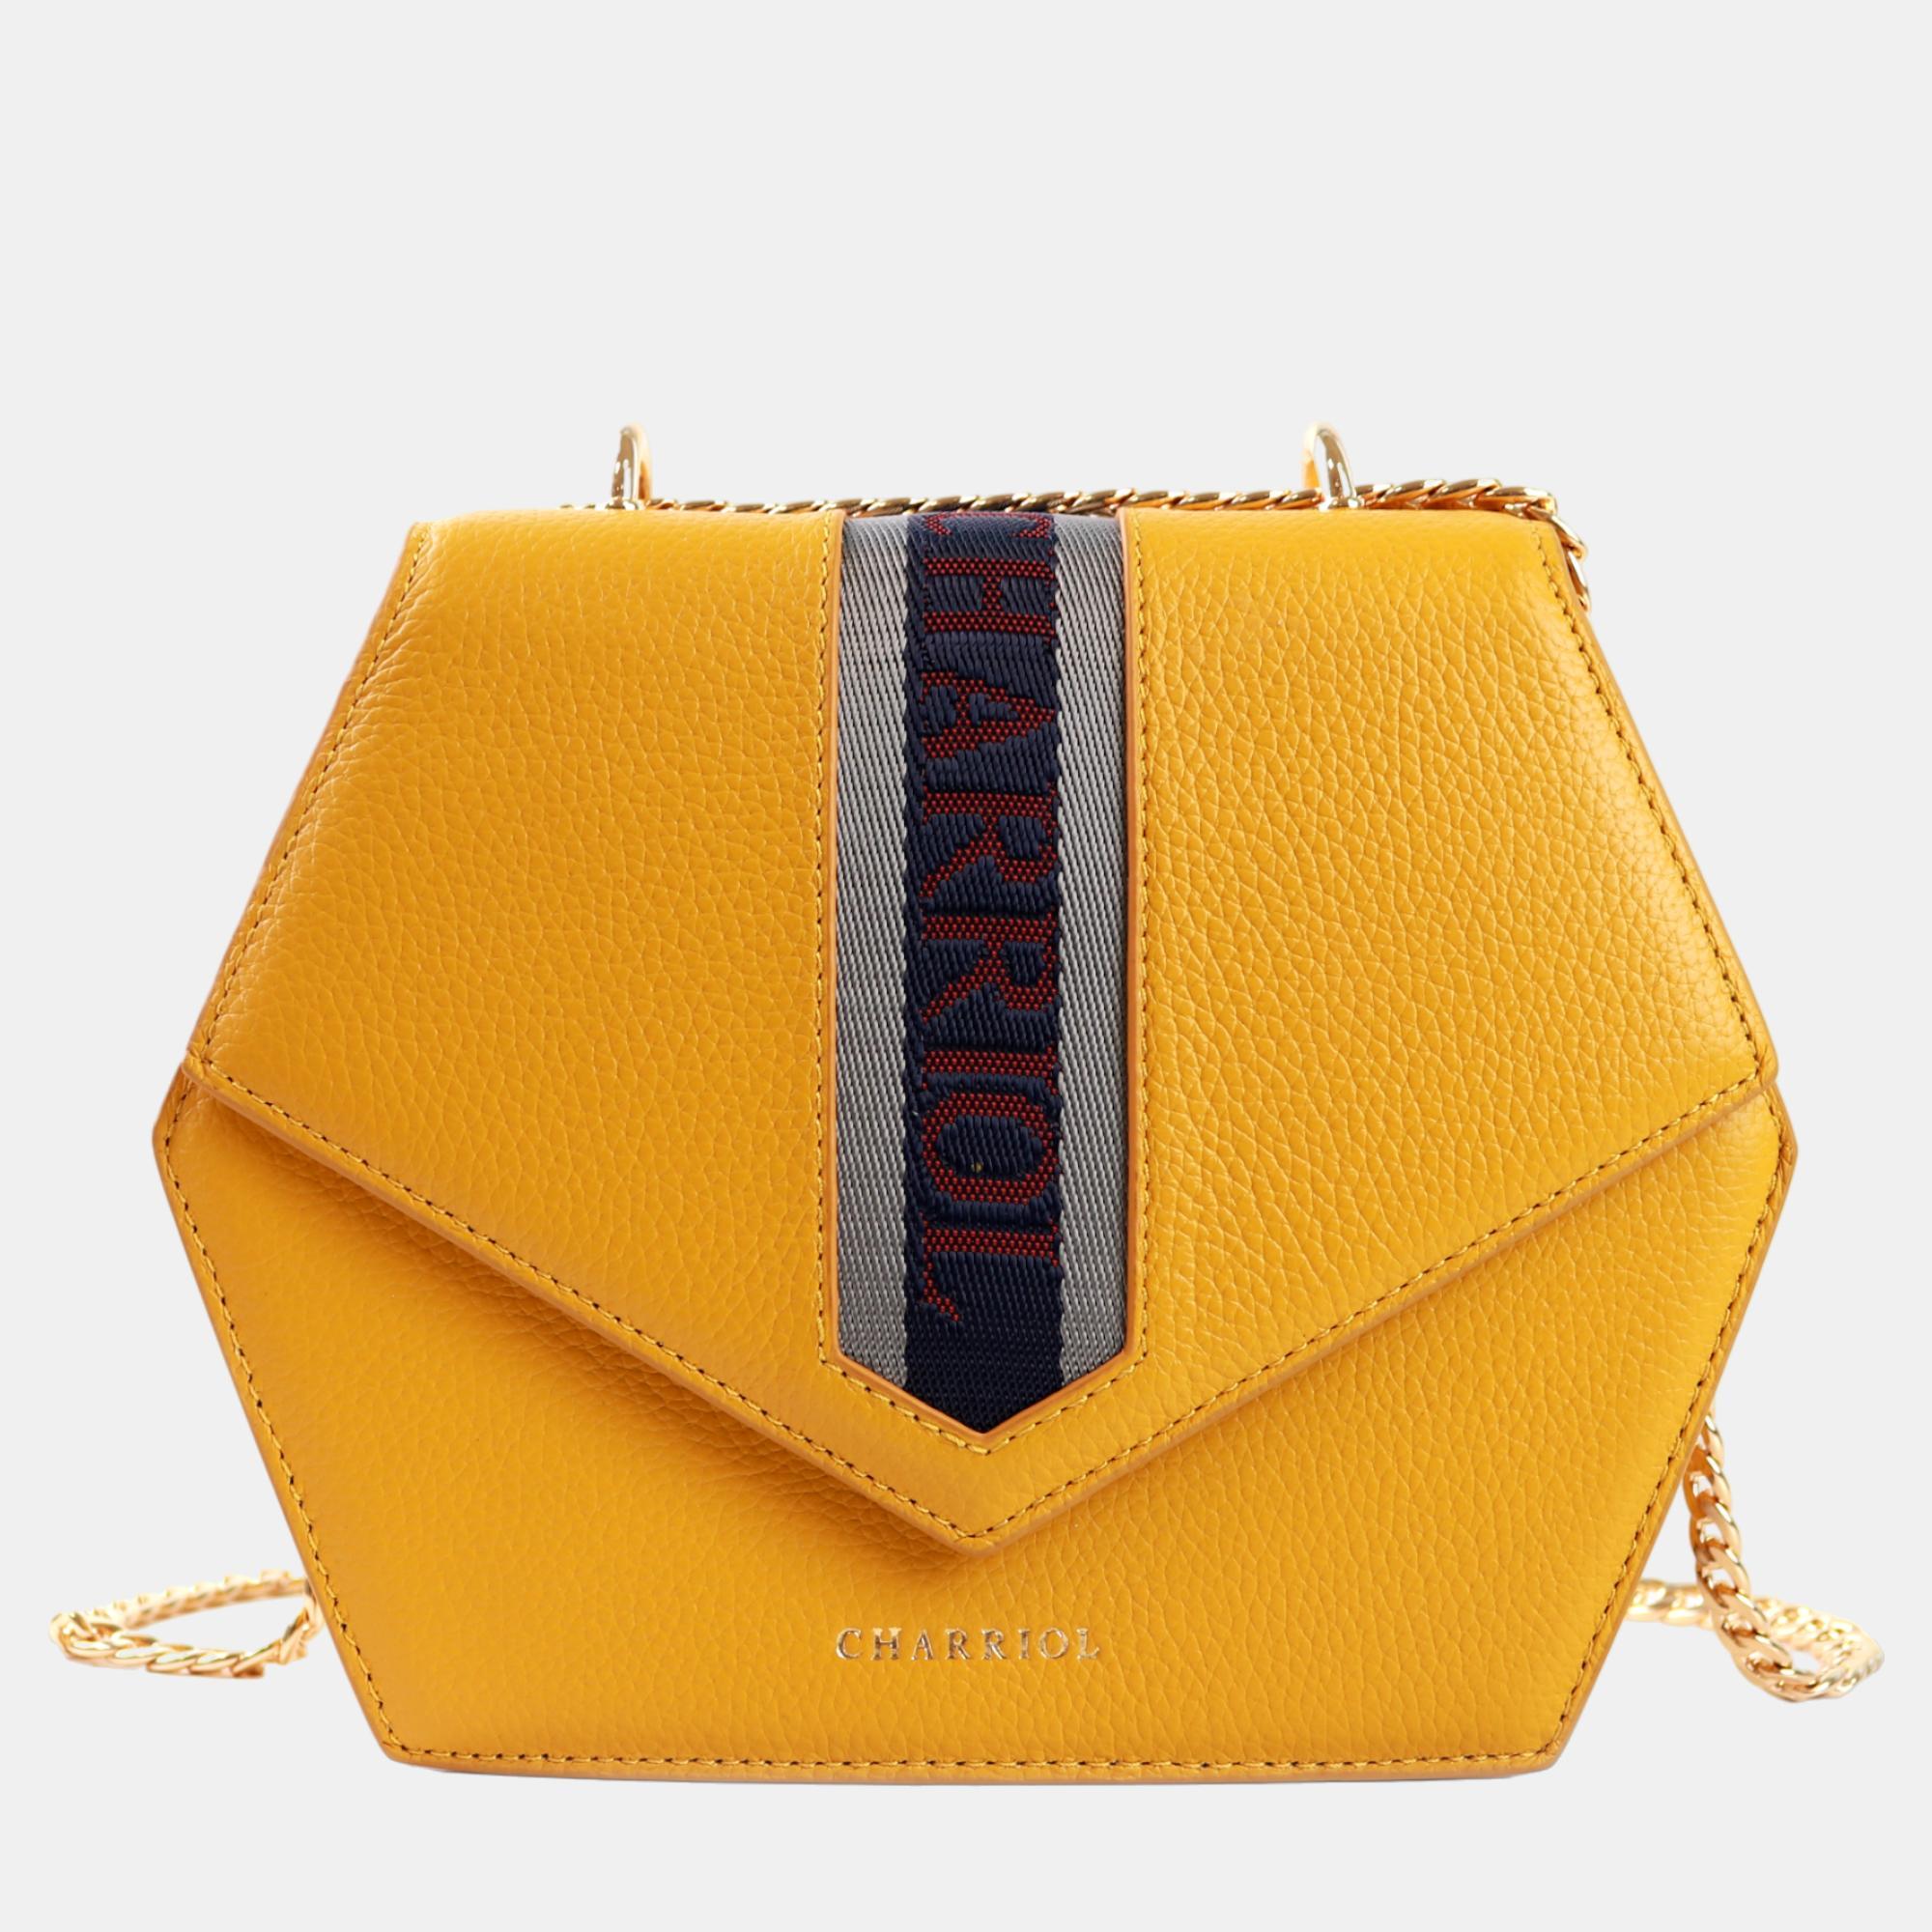 Charriol yellow leather deauville crossbody